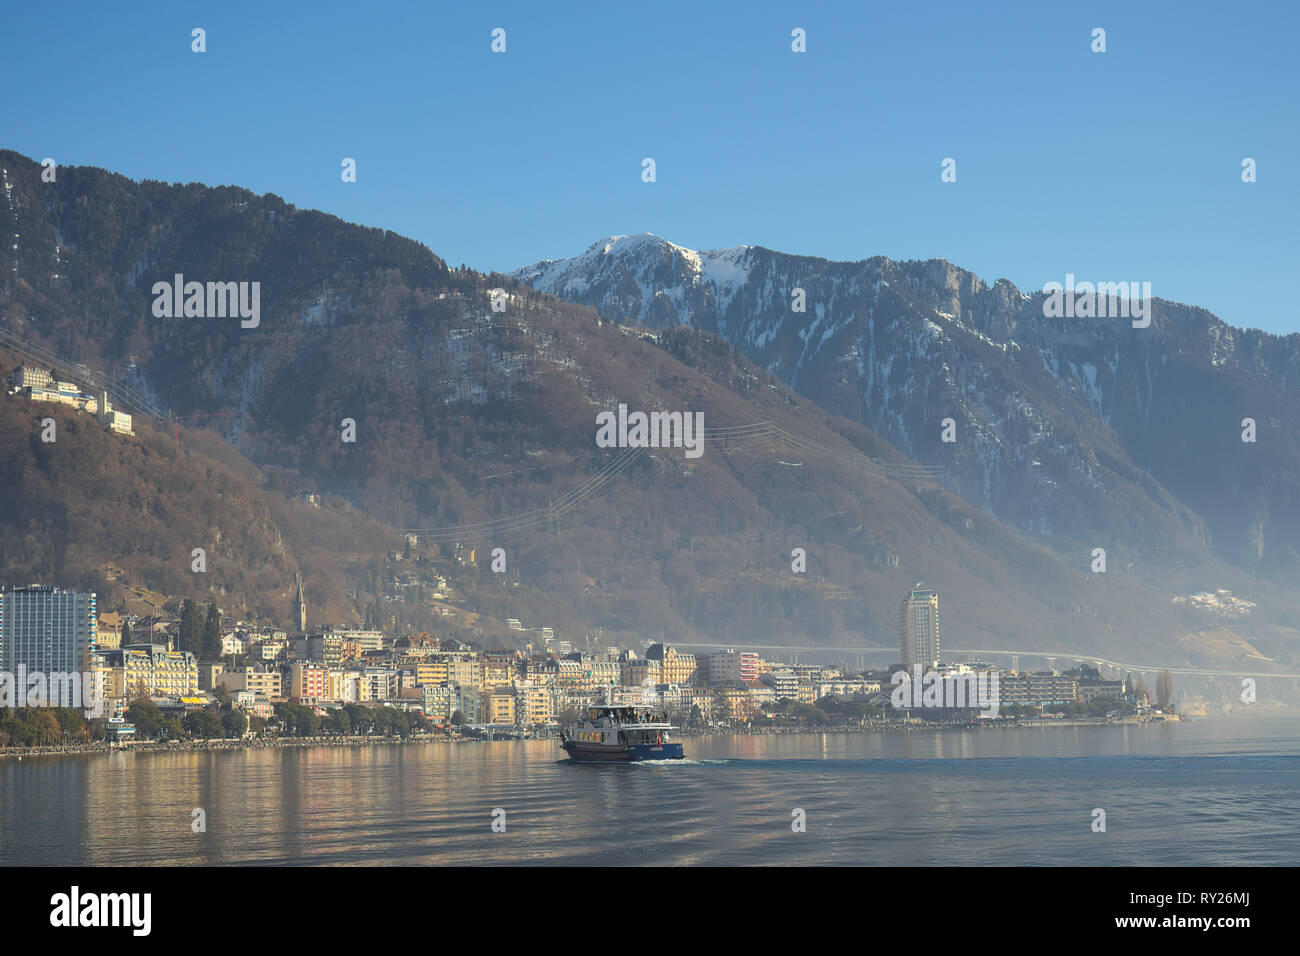 Montreux, Switzerland - 02 17, 2019: Ship cruising towards Montreux with mountains in the background. Stock Photo